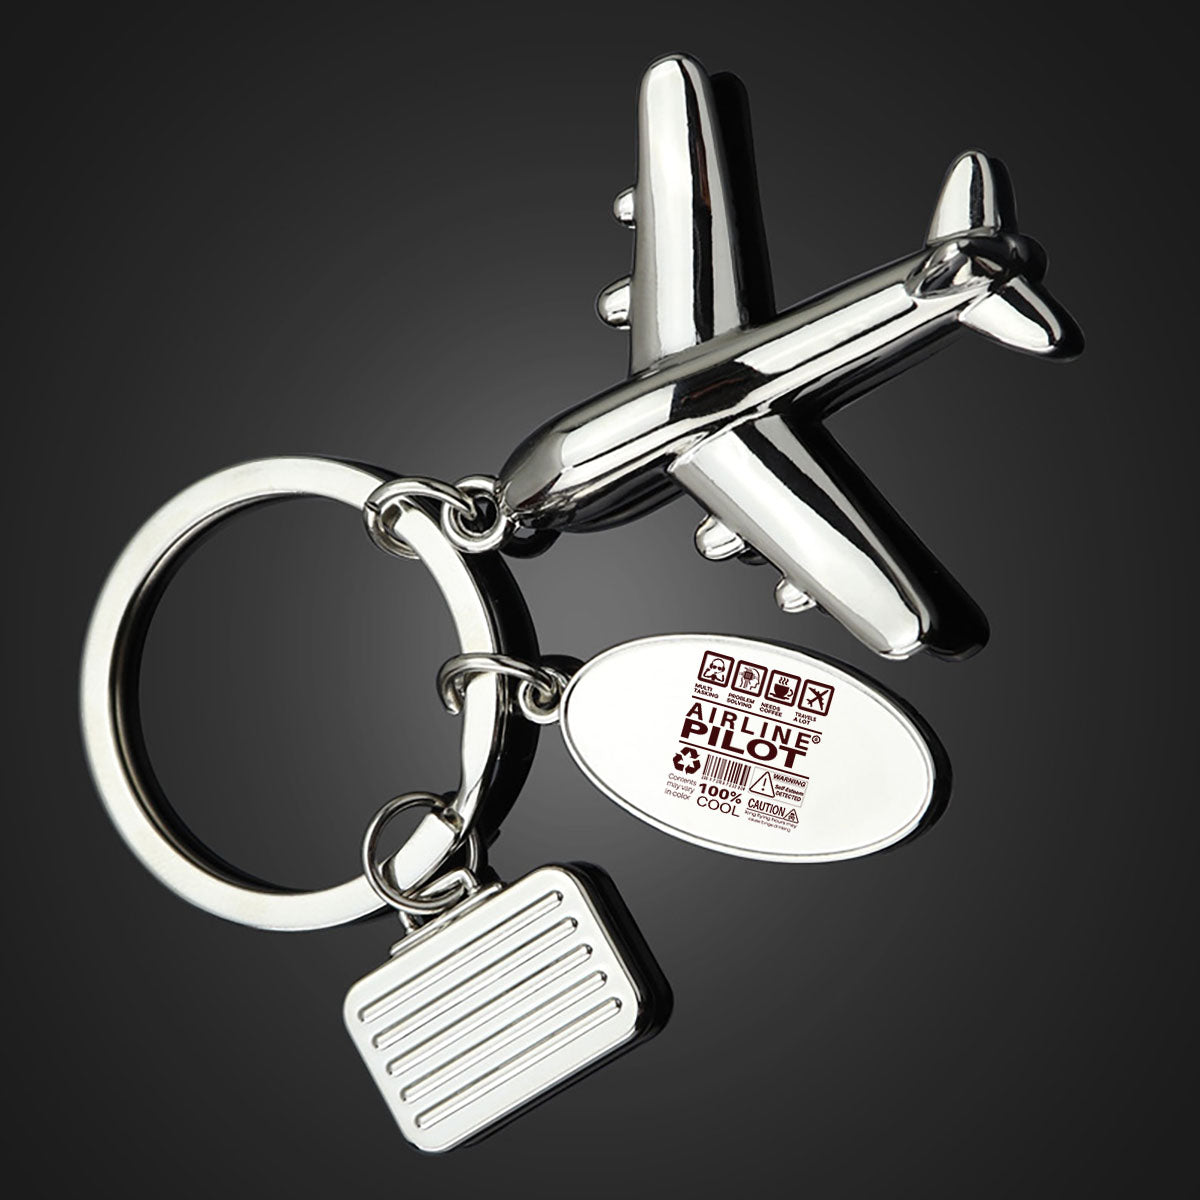 Airline Pilot Label Designed Suitcase Airplane Key Chains